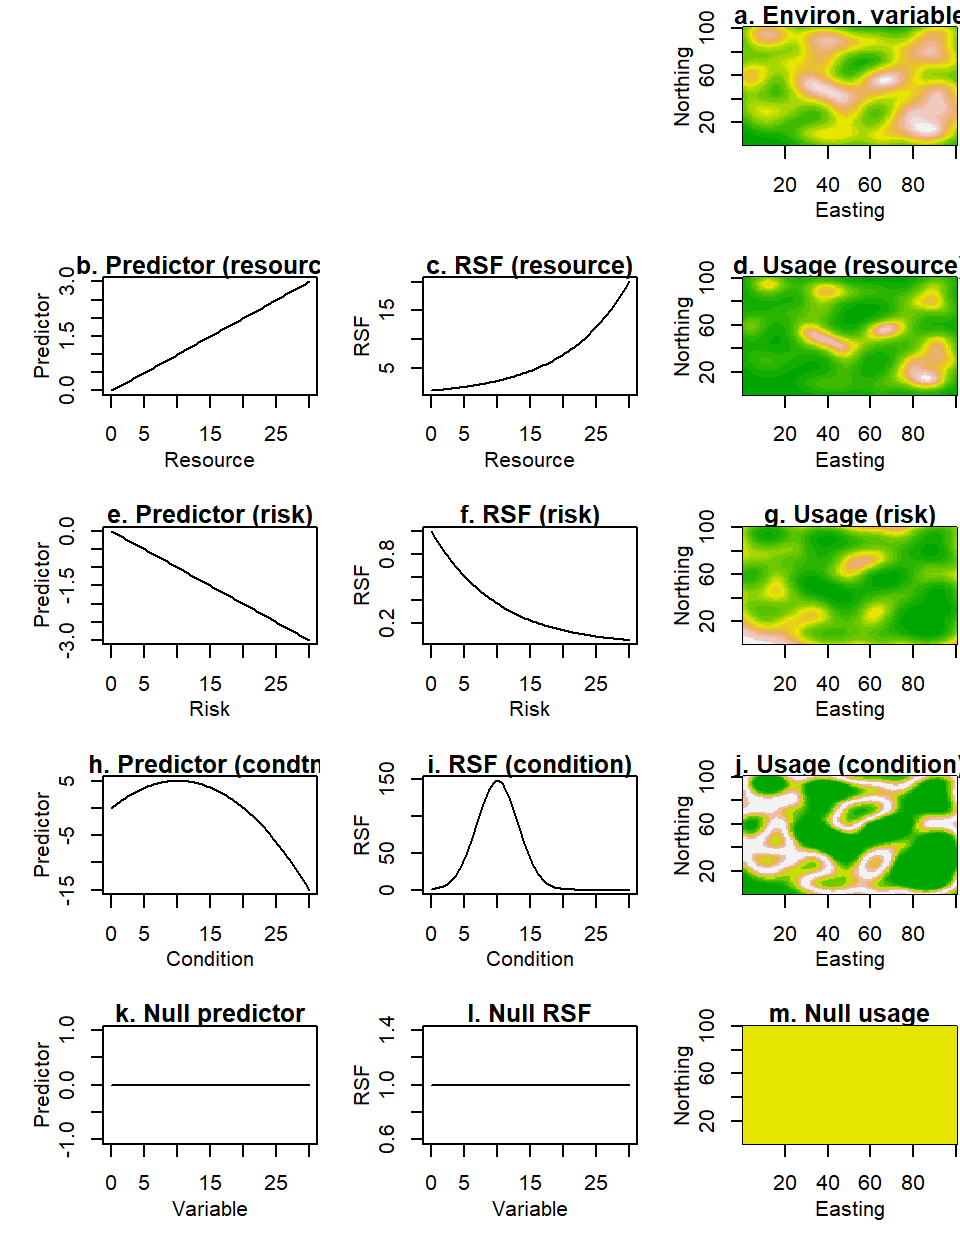 Usage in response to different types of variables. Consider the generic layer in (a) which representes the spatial distribution of an environmental variable. In the first and second columns we show the predictor and selection functions assuming that the organism responds to the variable as if it is a resource (b, c), a risk (e, f), a condition (h, i). In the third column (d, g, j) we show the expected distribution of the organism in each of these three scenarios. For completeness, in the bottom row, we show the predictor, selection functions and homogeneous spatial expectation for an organism that is unresponsive to the environmental variable.